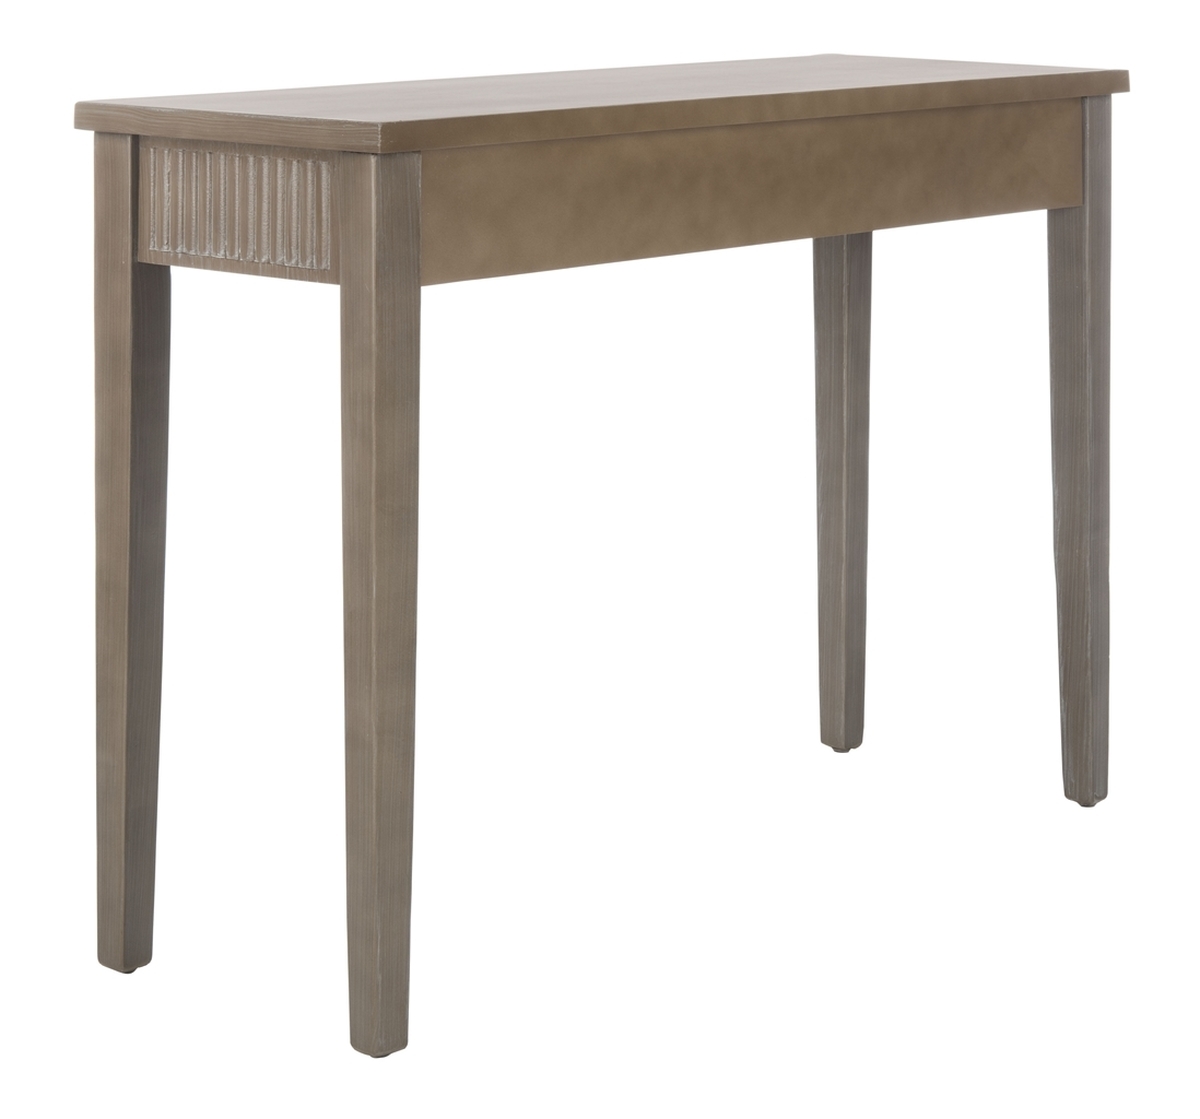 Beale Console With Storage Drawer - Grey - Arlo Home - Image 5